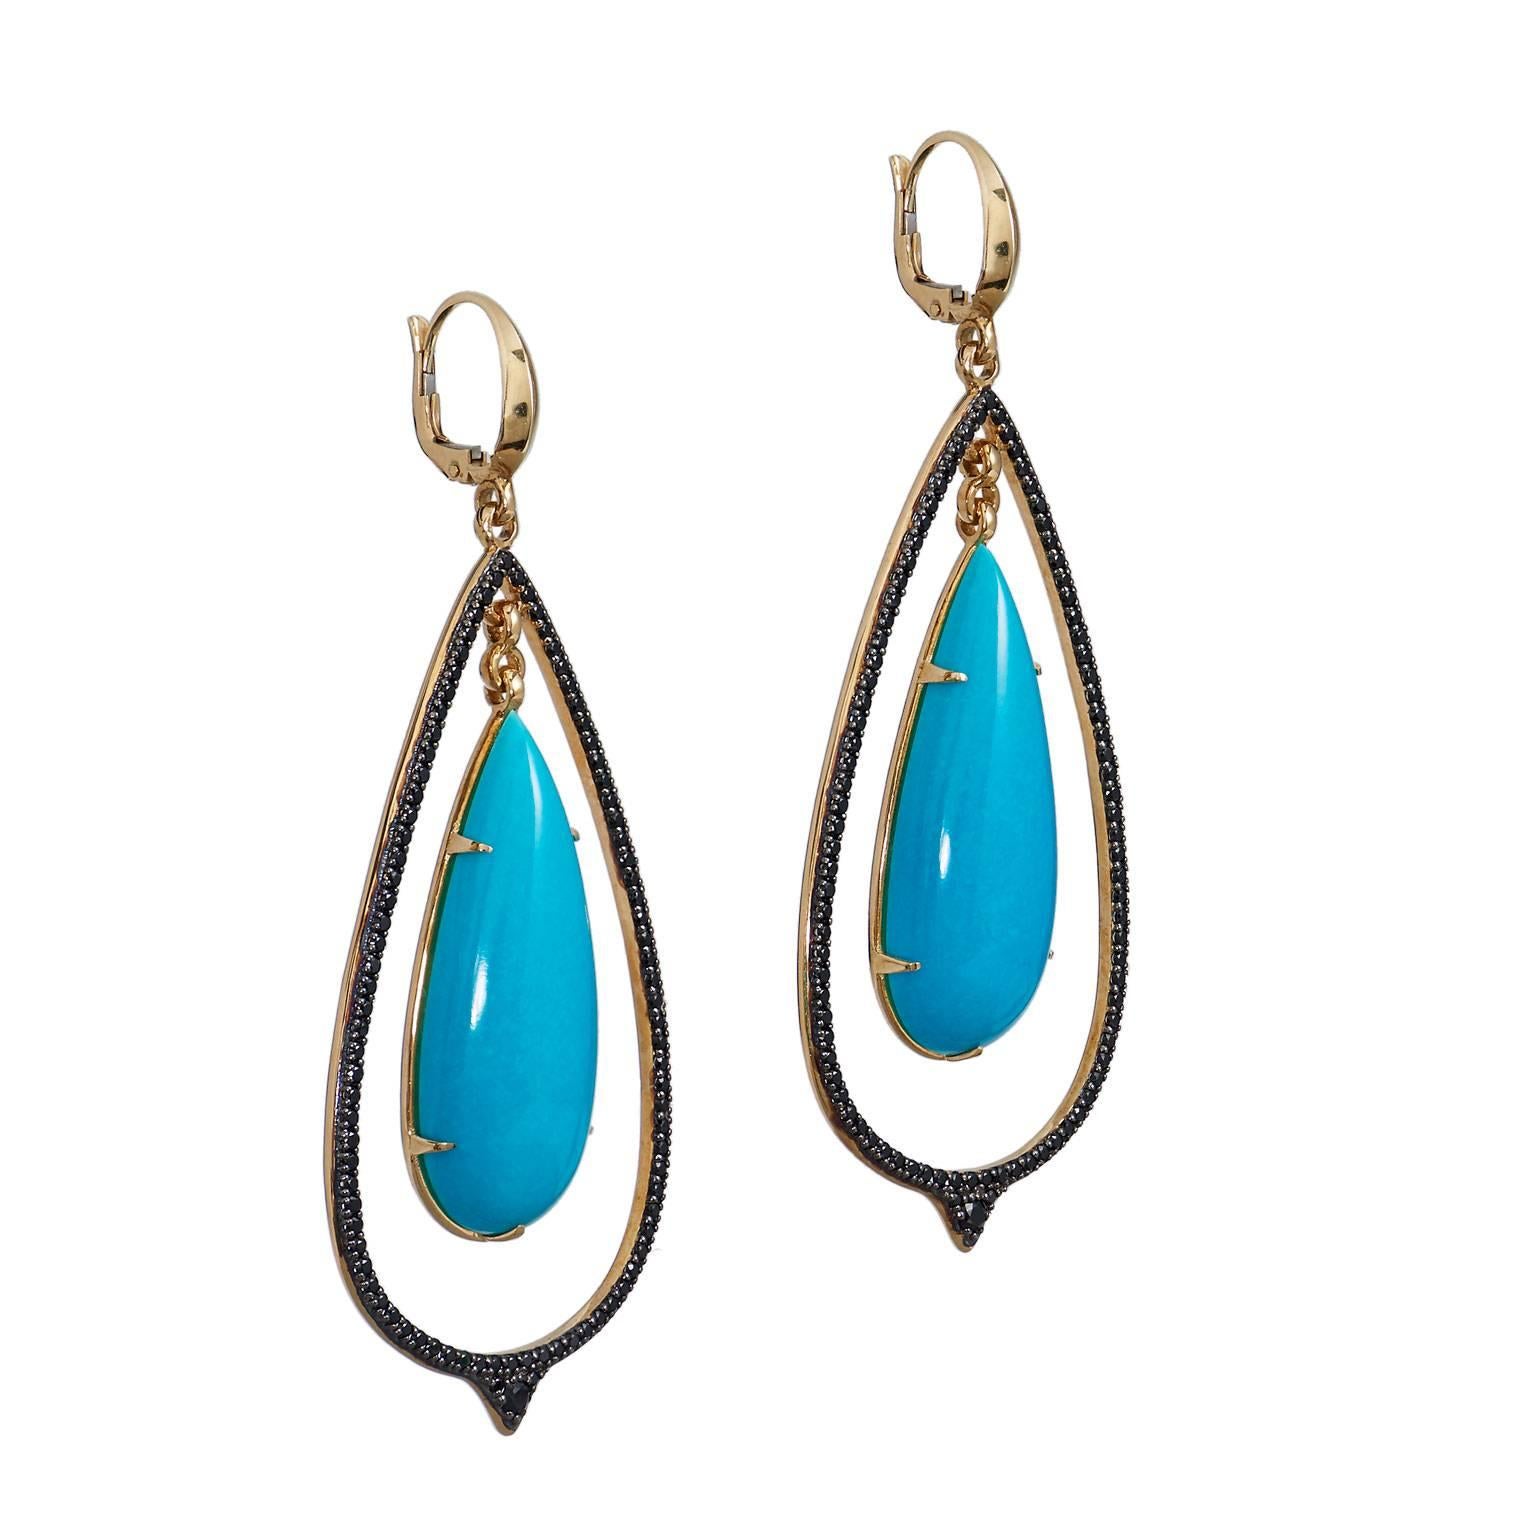 Large 14 Karat Gold Turquoise Double-Drop Spinel Pave Set Lever Back Earrings

These glamours earrings are created with 14 karat yellow gold.  They have a double drop hoop that features 2, 35.1 mm x 12.9 mm pear-shaped turquoise drops.

The outer